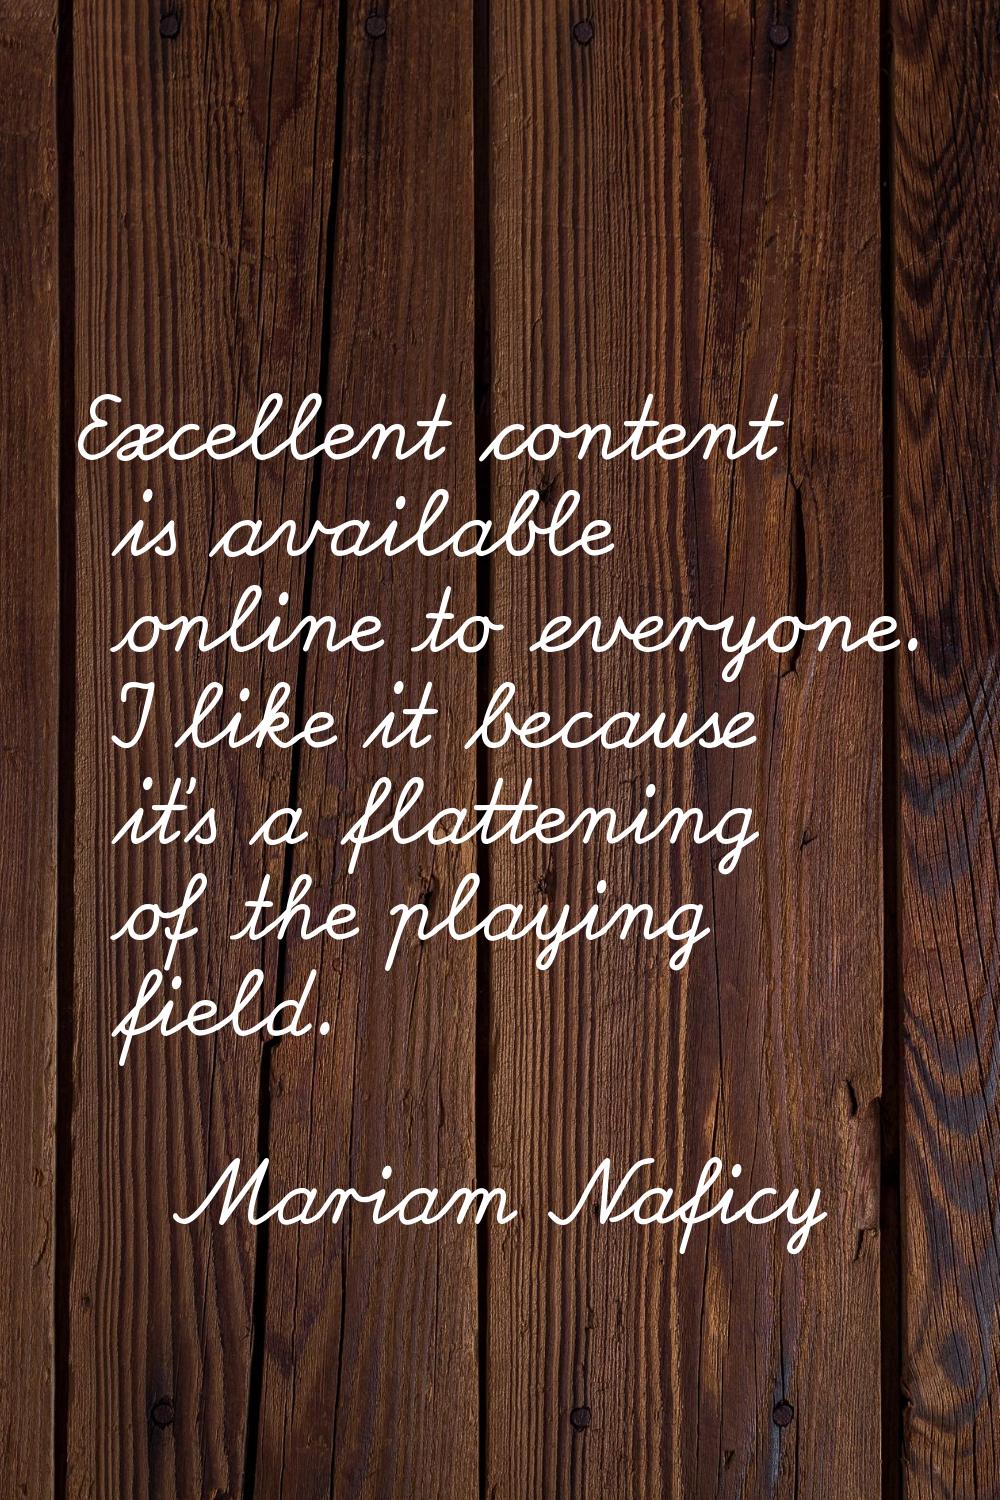 Excellent content is available online to everyone. I like it because it's a flattening of the playi